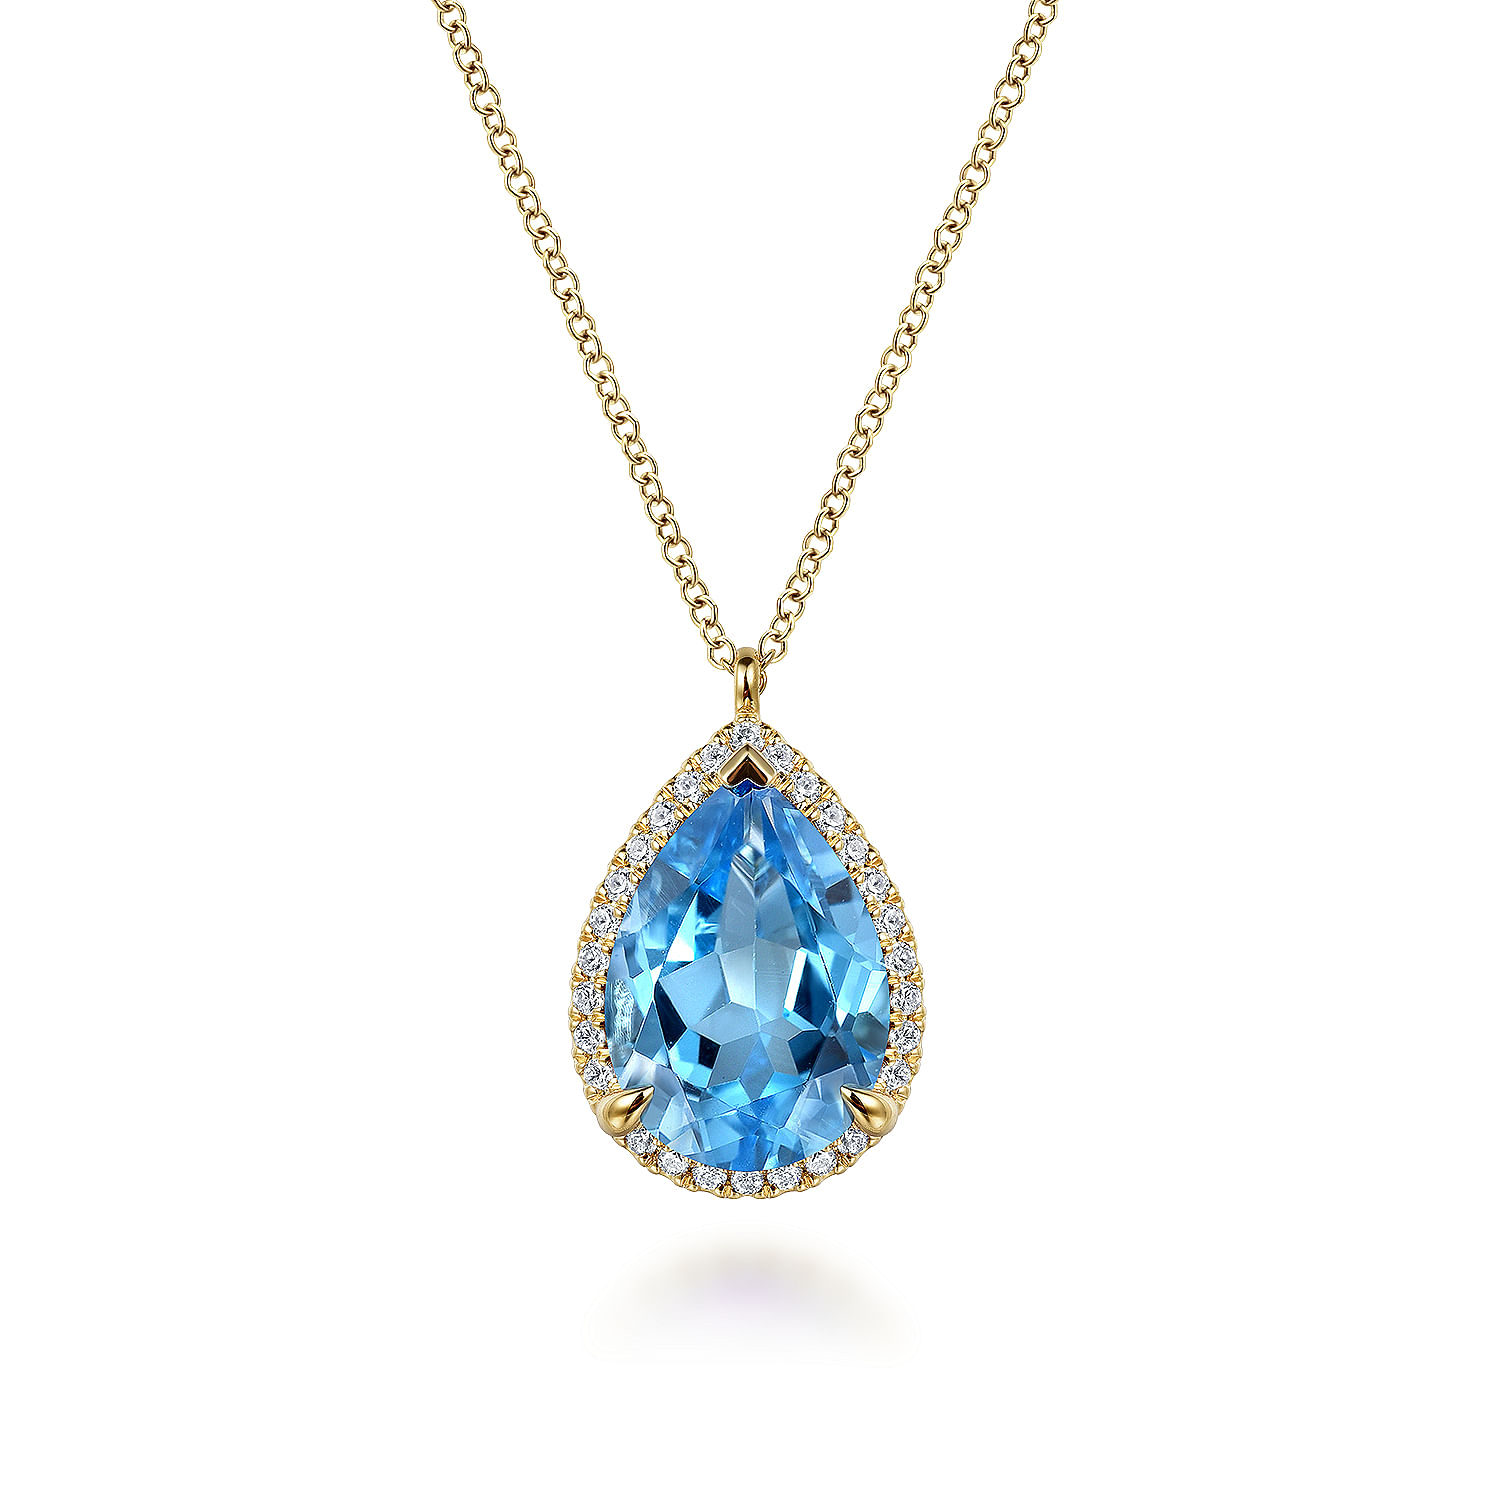 14K Yellow Gold Diamond and Flat Pear Shape Blue Topaz Necklace With Flower Pattern J-Back